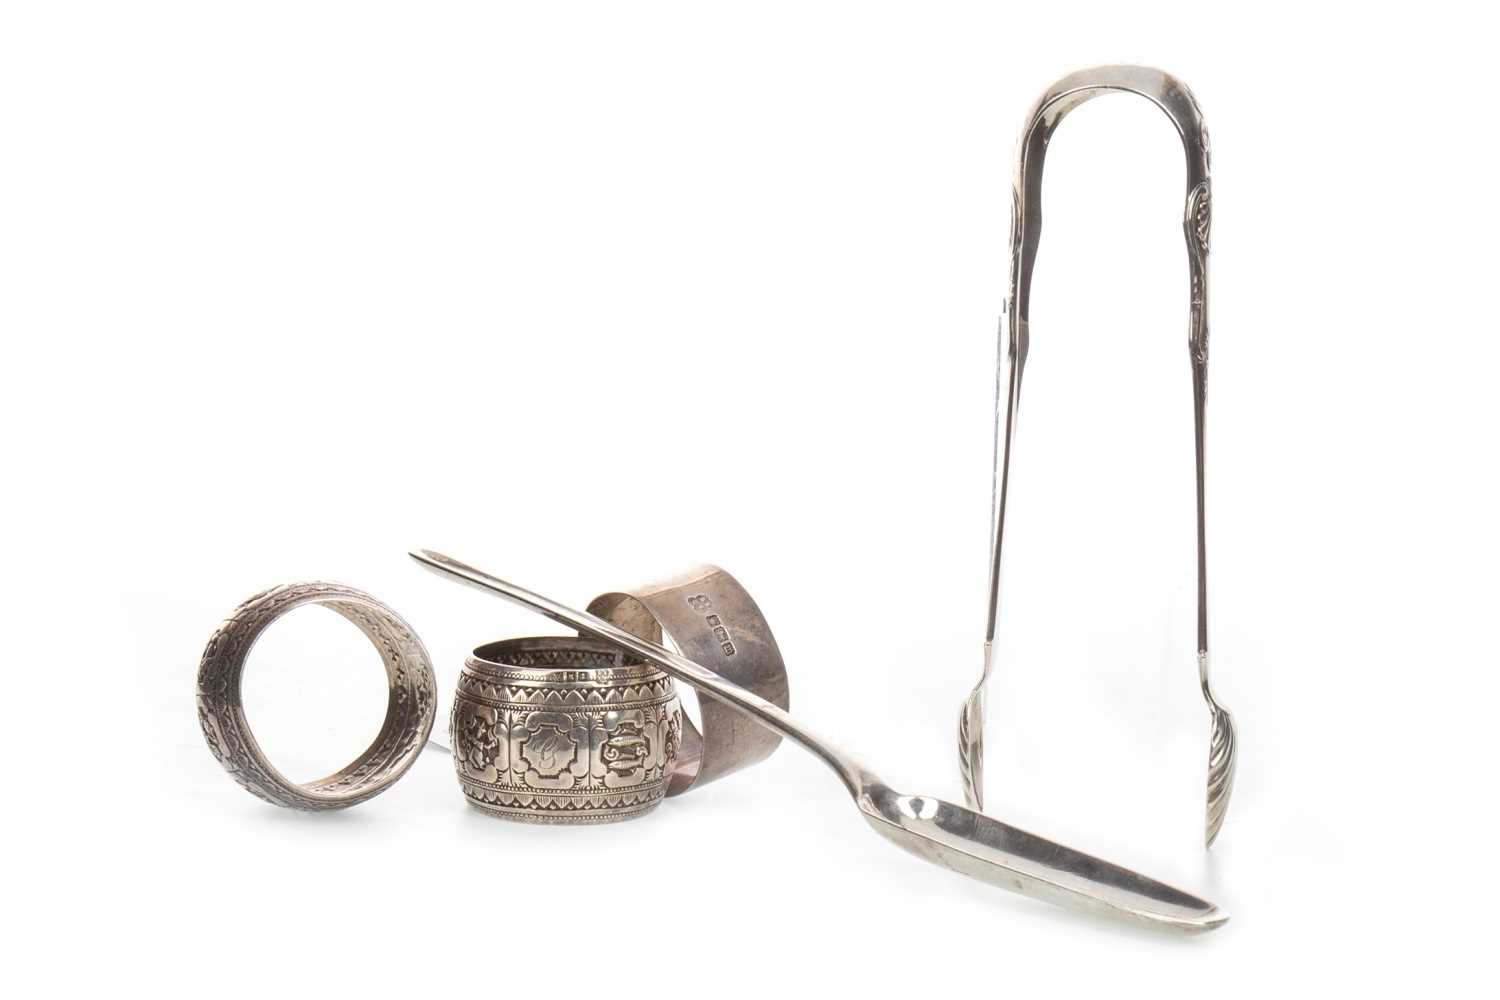 Lot 830 - A GEORGE III SILVER MARROW SCOOP ALONG WITH THREE NAPKIN RINGS AND A PAIR OF SUGAR TONGS